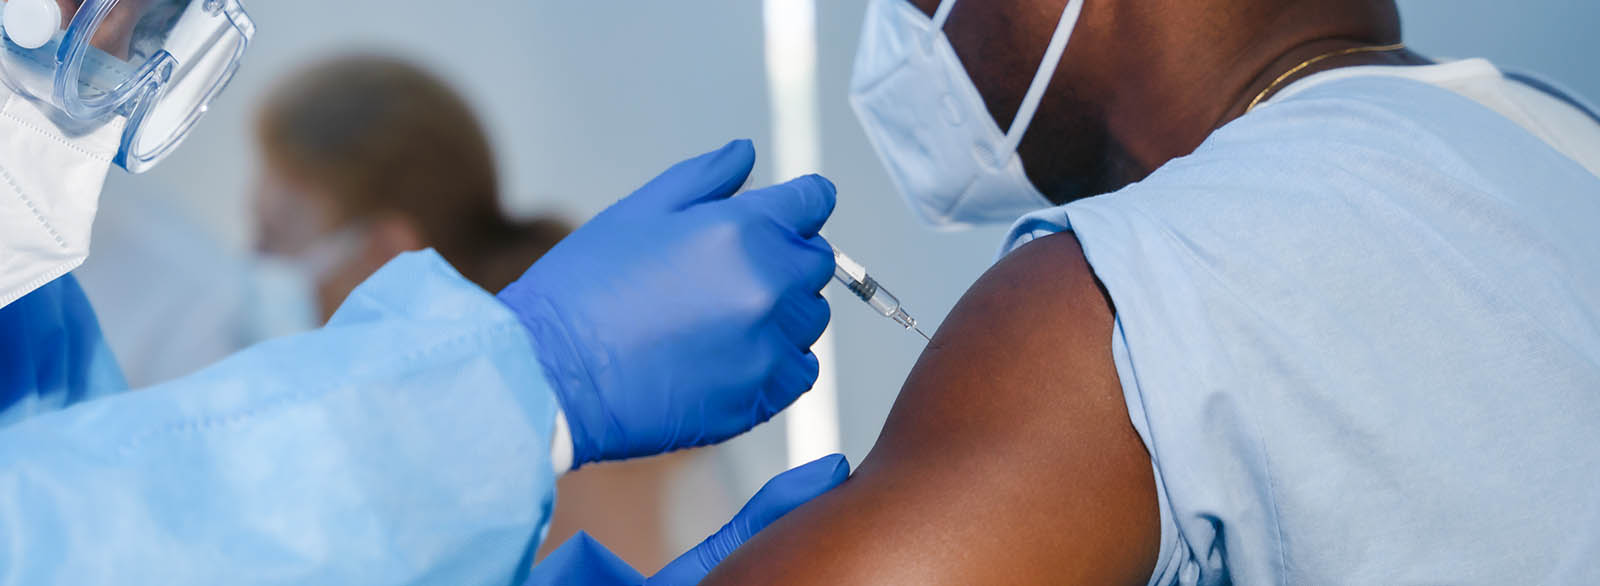 Healthcare worker receiving the COVID-19 vaccine.